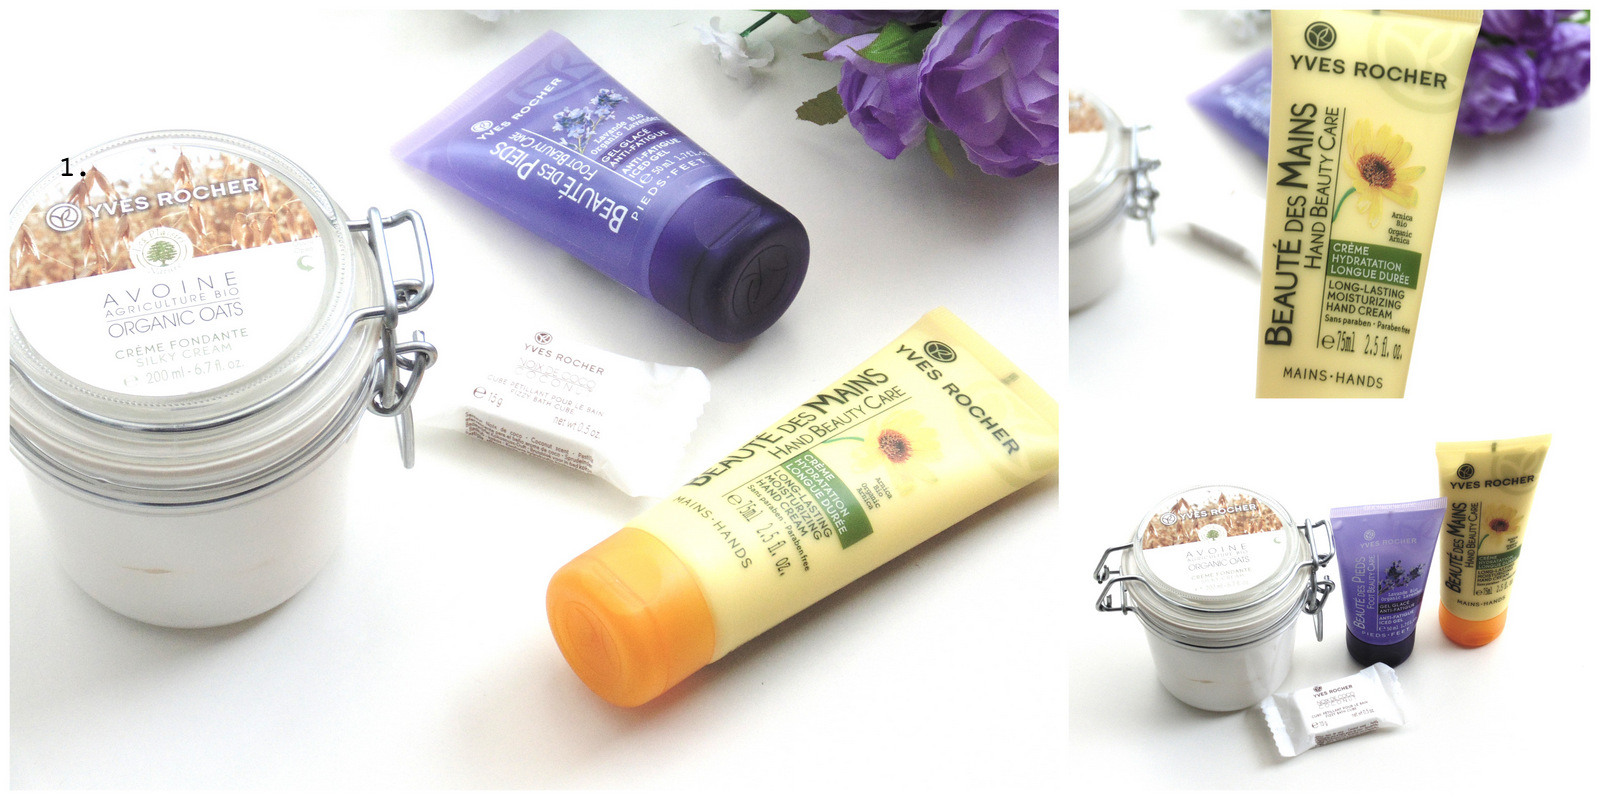 My Current Pamper Products Ft. Yves Rocher